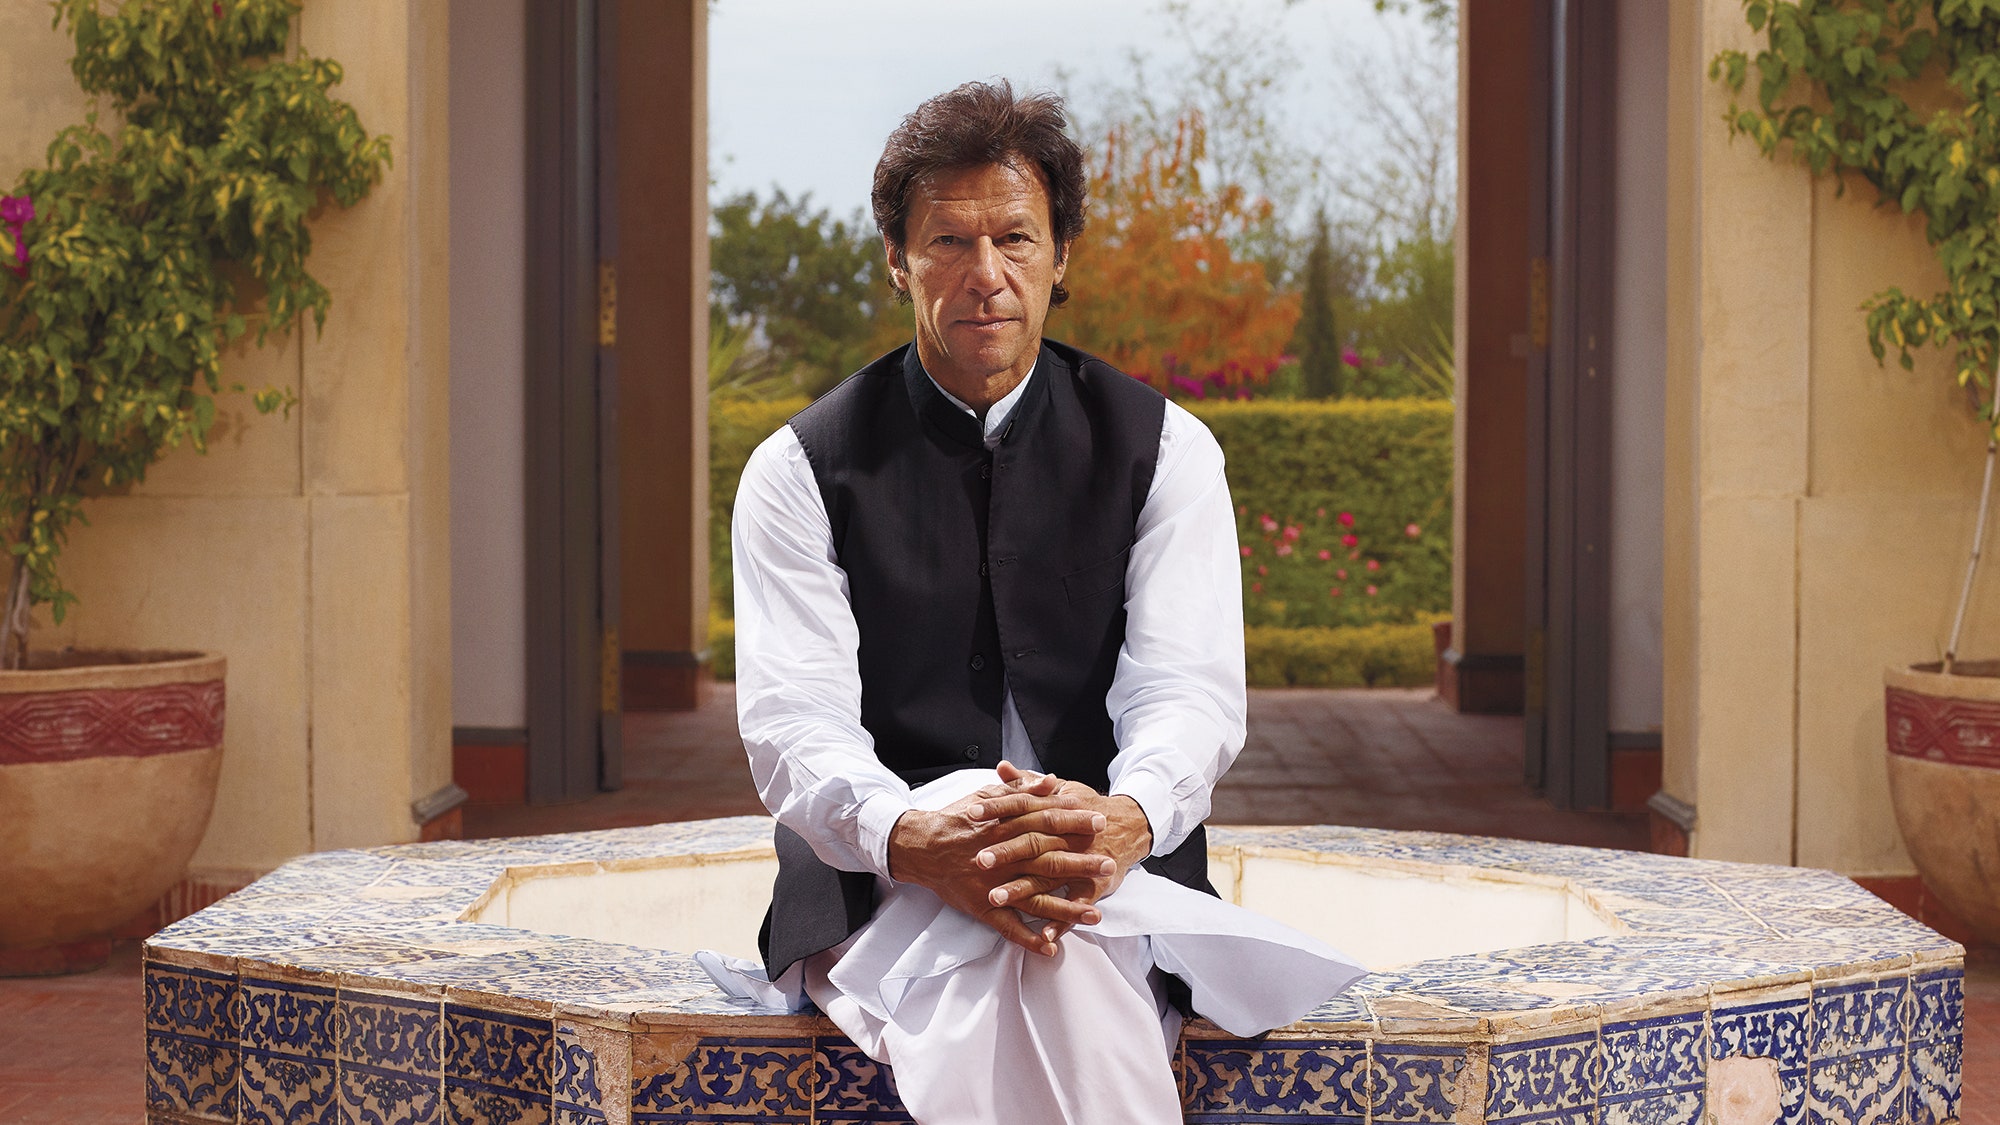 You must have been wondering about what is Forty Rules of Love as per the Prime Minister Imran Khan? For the month of October, PM Imran Khan has recommended to read the book "The Forty Rules of Love". He has also explained the reason of recommending this book to read. Check out the details we have got here for all of you! Forty Rules of Love According to PM Imran Khan The most popular and bestselling book by Elif Shafak "The Forty Rules of Love" is the new recommendation by PM Imran Khan. While suggesting to read this book, PM Imran said: “THIS OCTOBER I SUGGEST OUR YOUTH TO READ ‘THE FORTY RULES OF LOVE’ BY ELIF SHAFAK." While explaining about the reason of recommending this book to read, PM further added: "AN INSPIRATIONAL BOOK ABOUT DIVINE LOVE, SUFISM, RUMI & HIS MURSHID SHAMS TABRIZ. I READ IT A FEW YEARS BACK AND WAS DEEPLY INSPIRED.”  According to PM Imran Khan, this book must be considered as the "Book of the month" to read specifically for the youth. This inspirational book is based on Sufism and the definition of divine love as elaborated by Rumi and Shams Tabriz.  Although Prime Minister Imran Khan read it few years back but considered this month the best time to suggest the youth of Pakistan to take out time for reading it.  Well... that's not the first time PM suggested any book to read. Taking a flashback to the month of May amid Corornavirus lockdown, PM had recommended that the youth should read the famous book ‘Lost Islamic History’.  PM captioned this suggestion post as: “A GREAT READ FOR OUR YOUTH DURING LOCKDOWN DAYS. AN EXCELLENT BRIEF HISTORY OF THE DRIVING FORCE THAT MADE ISLAMIC CIVILISATION THE GREATEST OF ITS TIME AND THEN THE FACTORS BEHIND ITS DECLINE.” PM Imran Khan Also Recommended to Watch Dirilis: Ertugrul As we know that, the idea of telecasting Turkish series Dirilis: Ertugrul on national television of Pakistan also came up from PM Imran. He directed PTV management to dub the series in Urdu language as it is worthy to watch for the people of Pakistan.  It is to mention here that the story of Dirilis: Ertugrul is based on Islamic history depicting the warfare and intellect of the Ottoman Empire.  Why PM Imran Suggest Forty Rules of Love? The idea behind suggesting to read The Forty Rules of Love by Elif Shafak is to bring the youth of Pakistan closer to religion.  A popular book review explains "The Forty Rules of Love" as: "ELIF SHAFAK UNFOLDS TWO TANTALISING PARALLEL NARRATIVES — ONE CONTEMPORARY AND THE OTHER SET IN THE THIRTEENTH CENTURY, WHEN RUMI ENCOUNTERED HIS SPIRITUAL MENTOR, THE WHIRLING DERVISH KNOWN AS SHAMS OF TABRIZ — THAT TOGETHER INCARNATE THE POET'S TIMELESS MESSAGE OF LOVE."  What do you think about PM Imran Khan's new suggestion? Please share your valuable feedback with us!